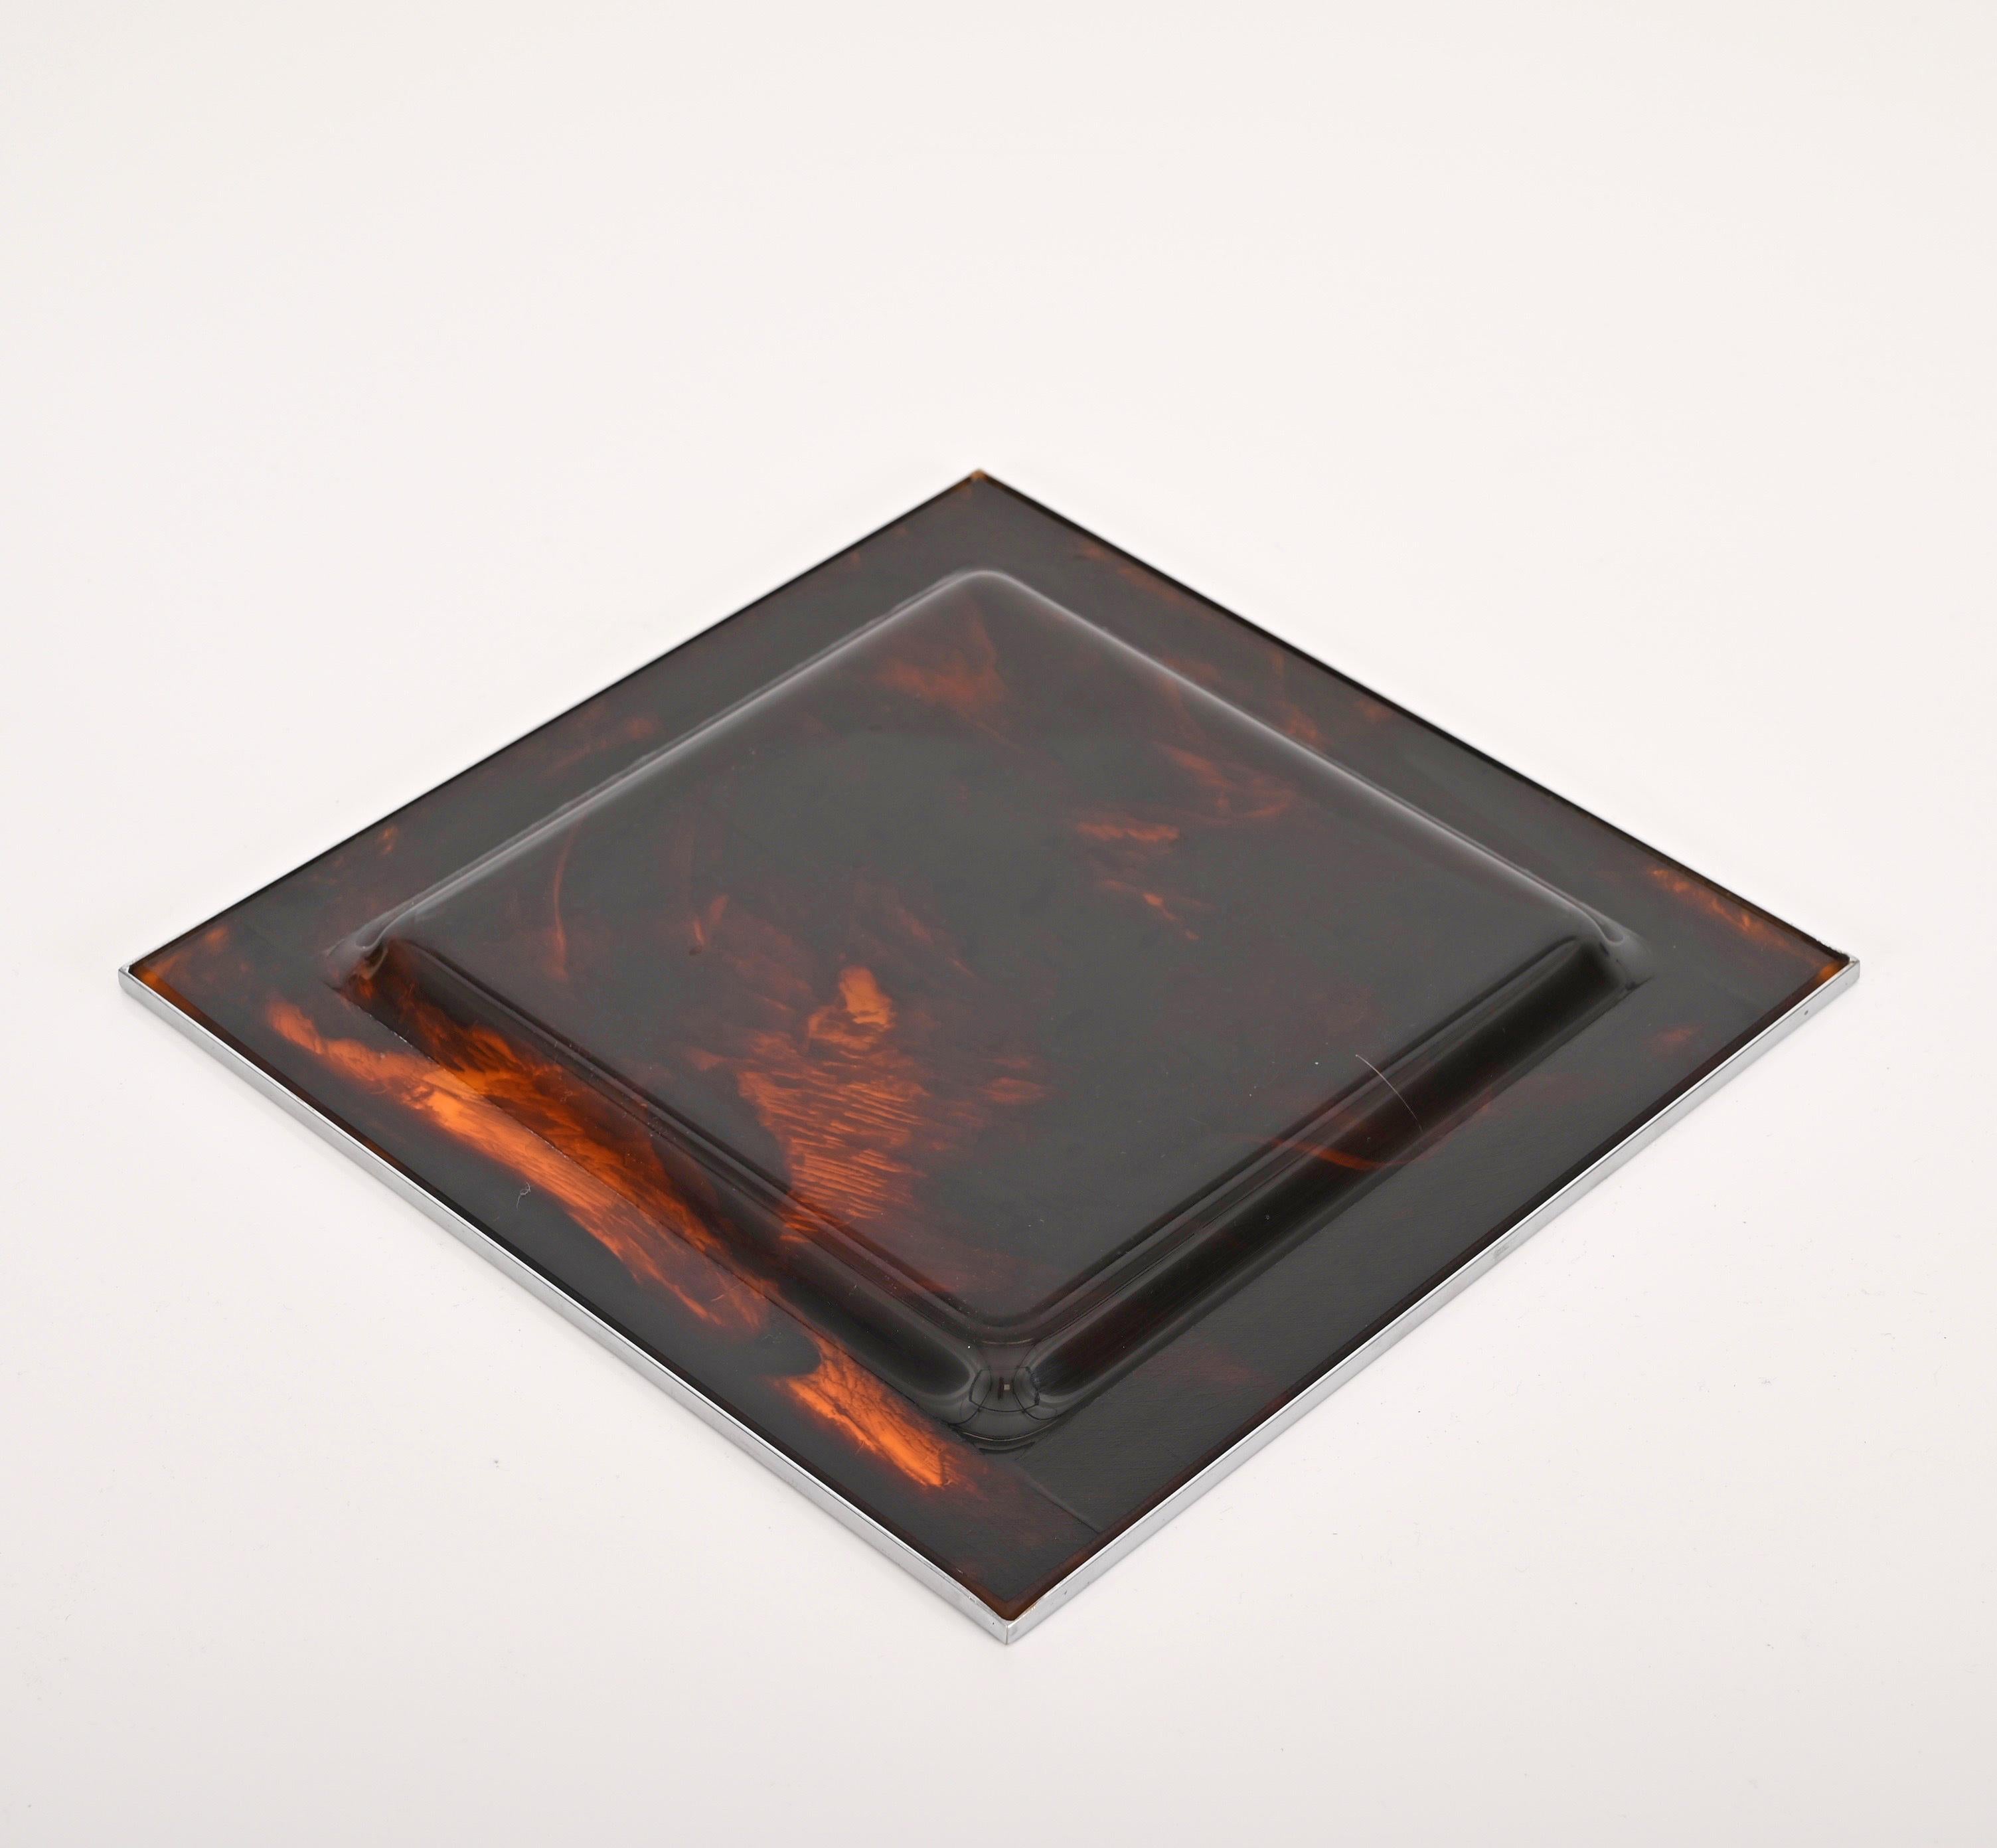 Christian Dior Midcentury Tortoiseshell and Lucite Italian Serving Tray, 1970s For Sale 8